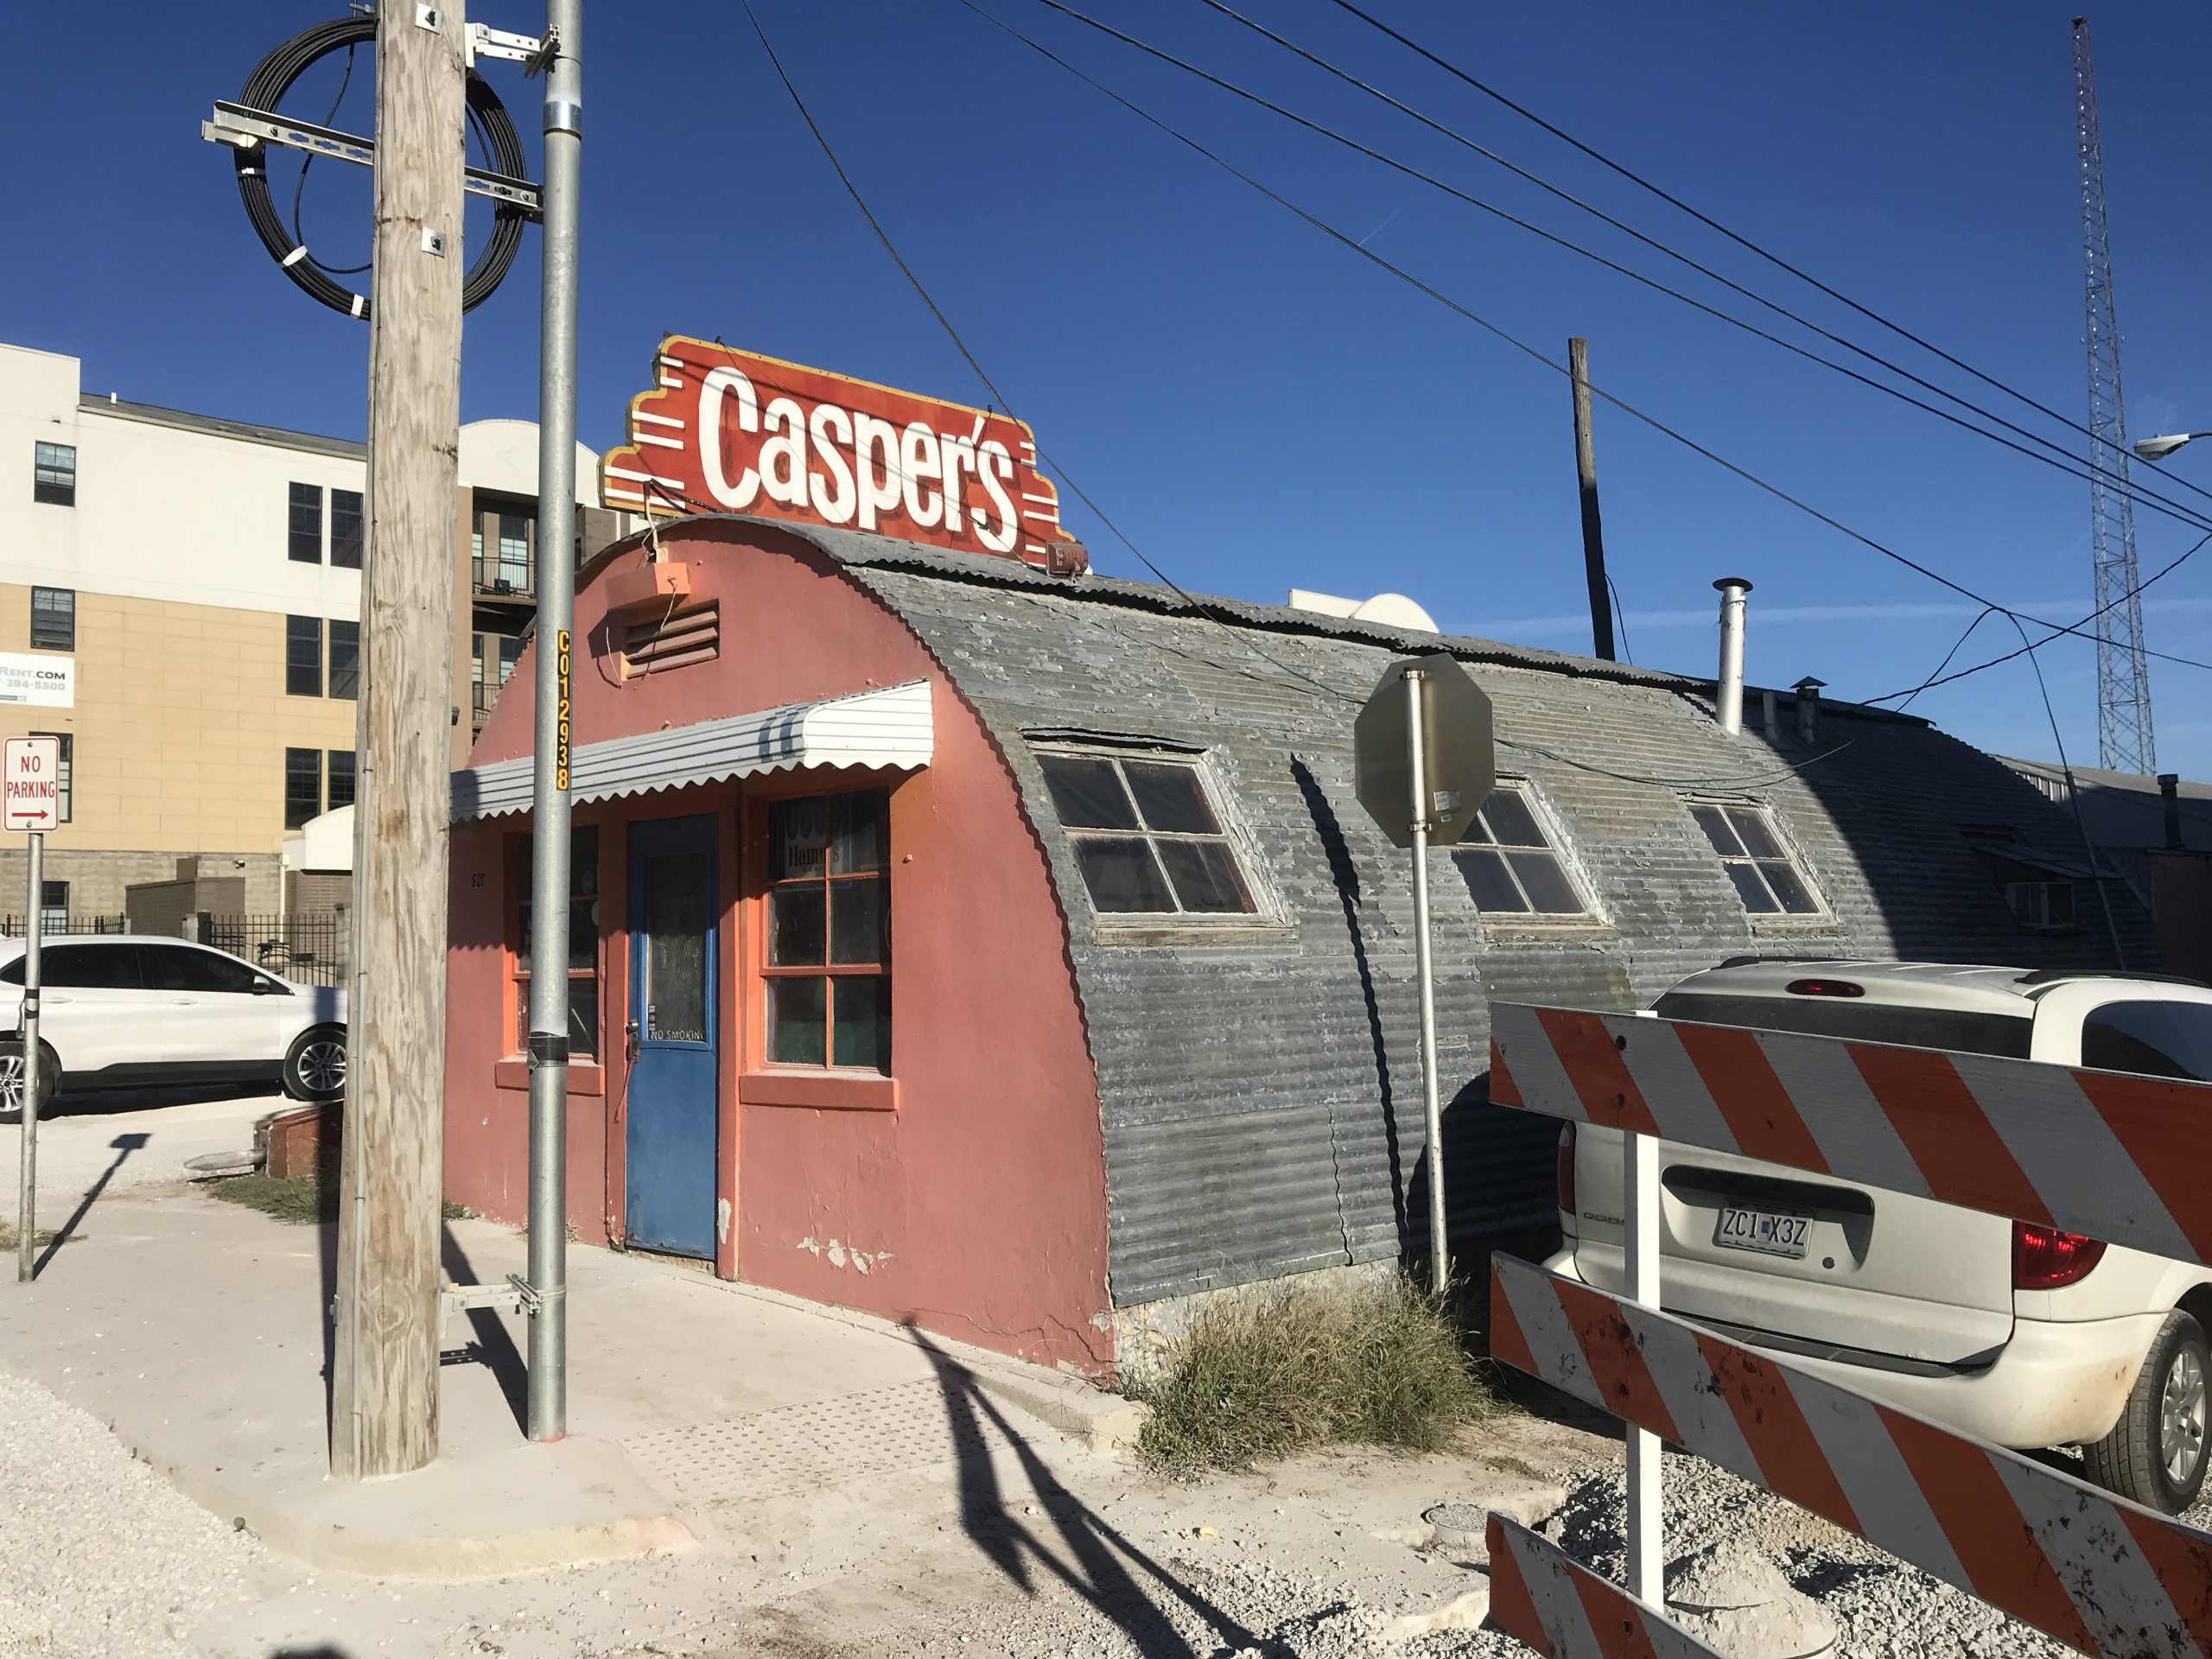 A red-and-silver Quonset hut with a sign reading "Casper's" on top